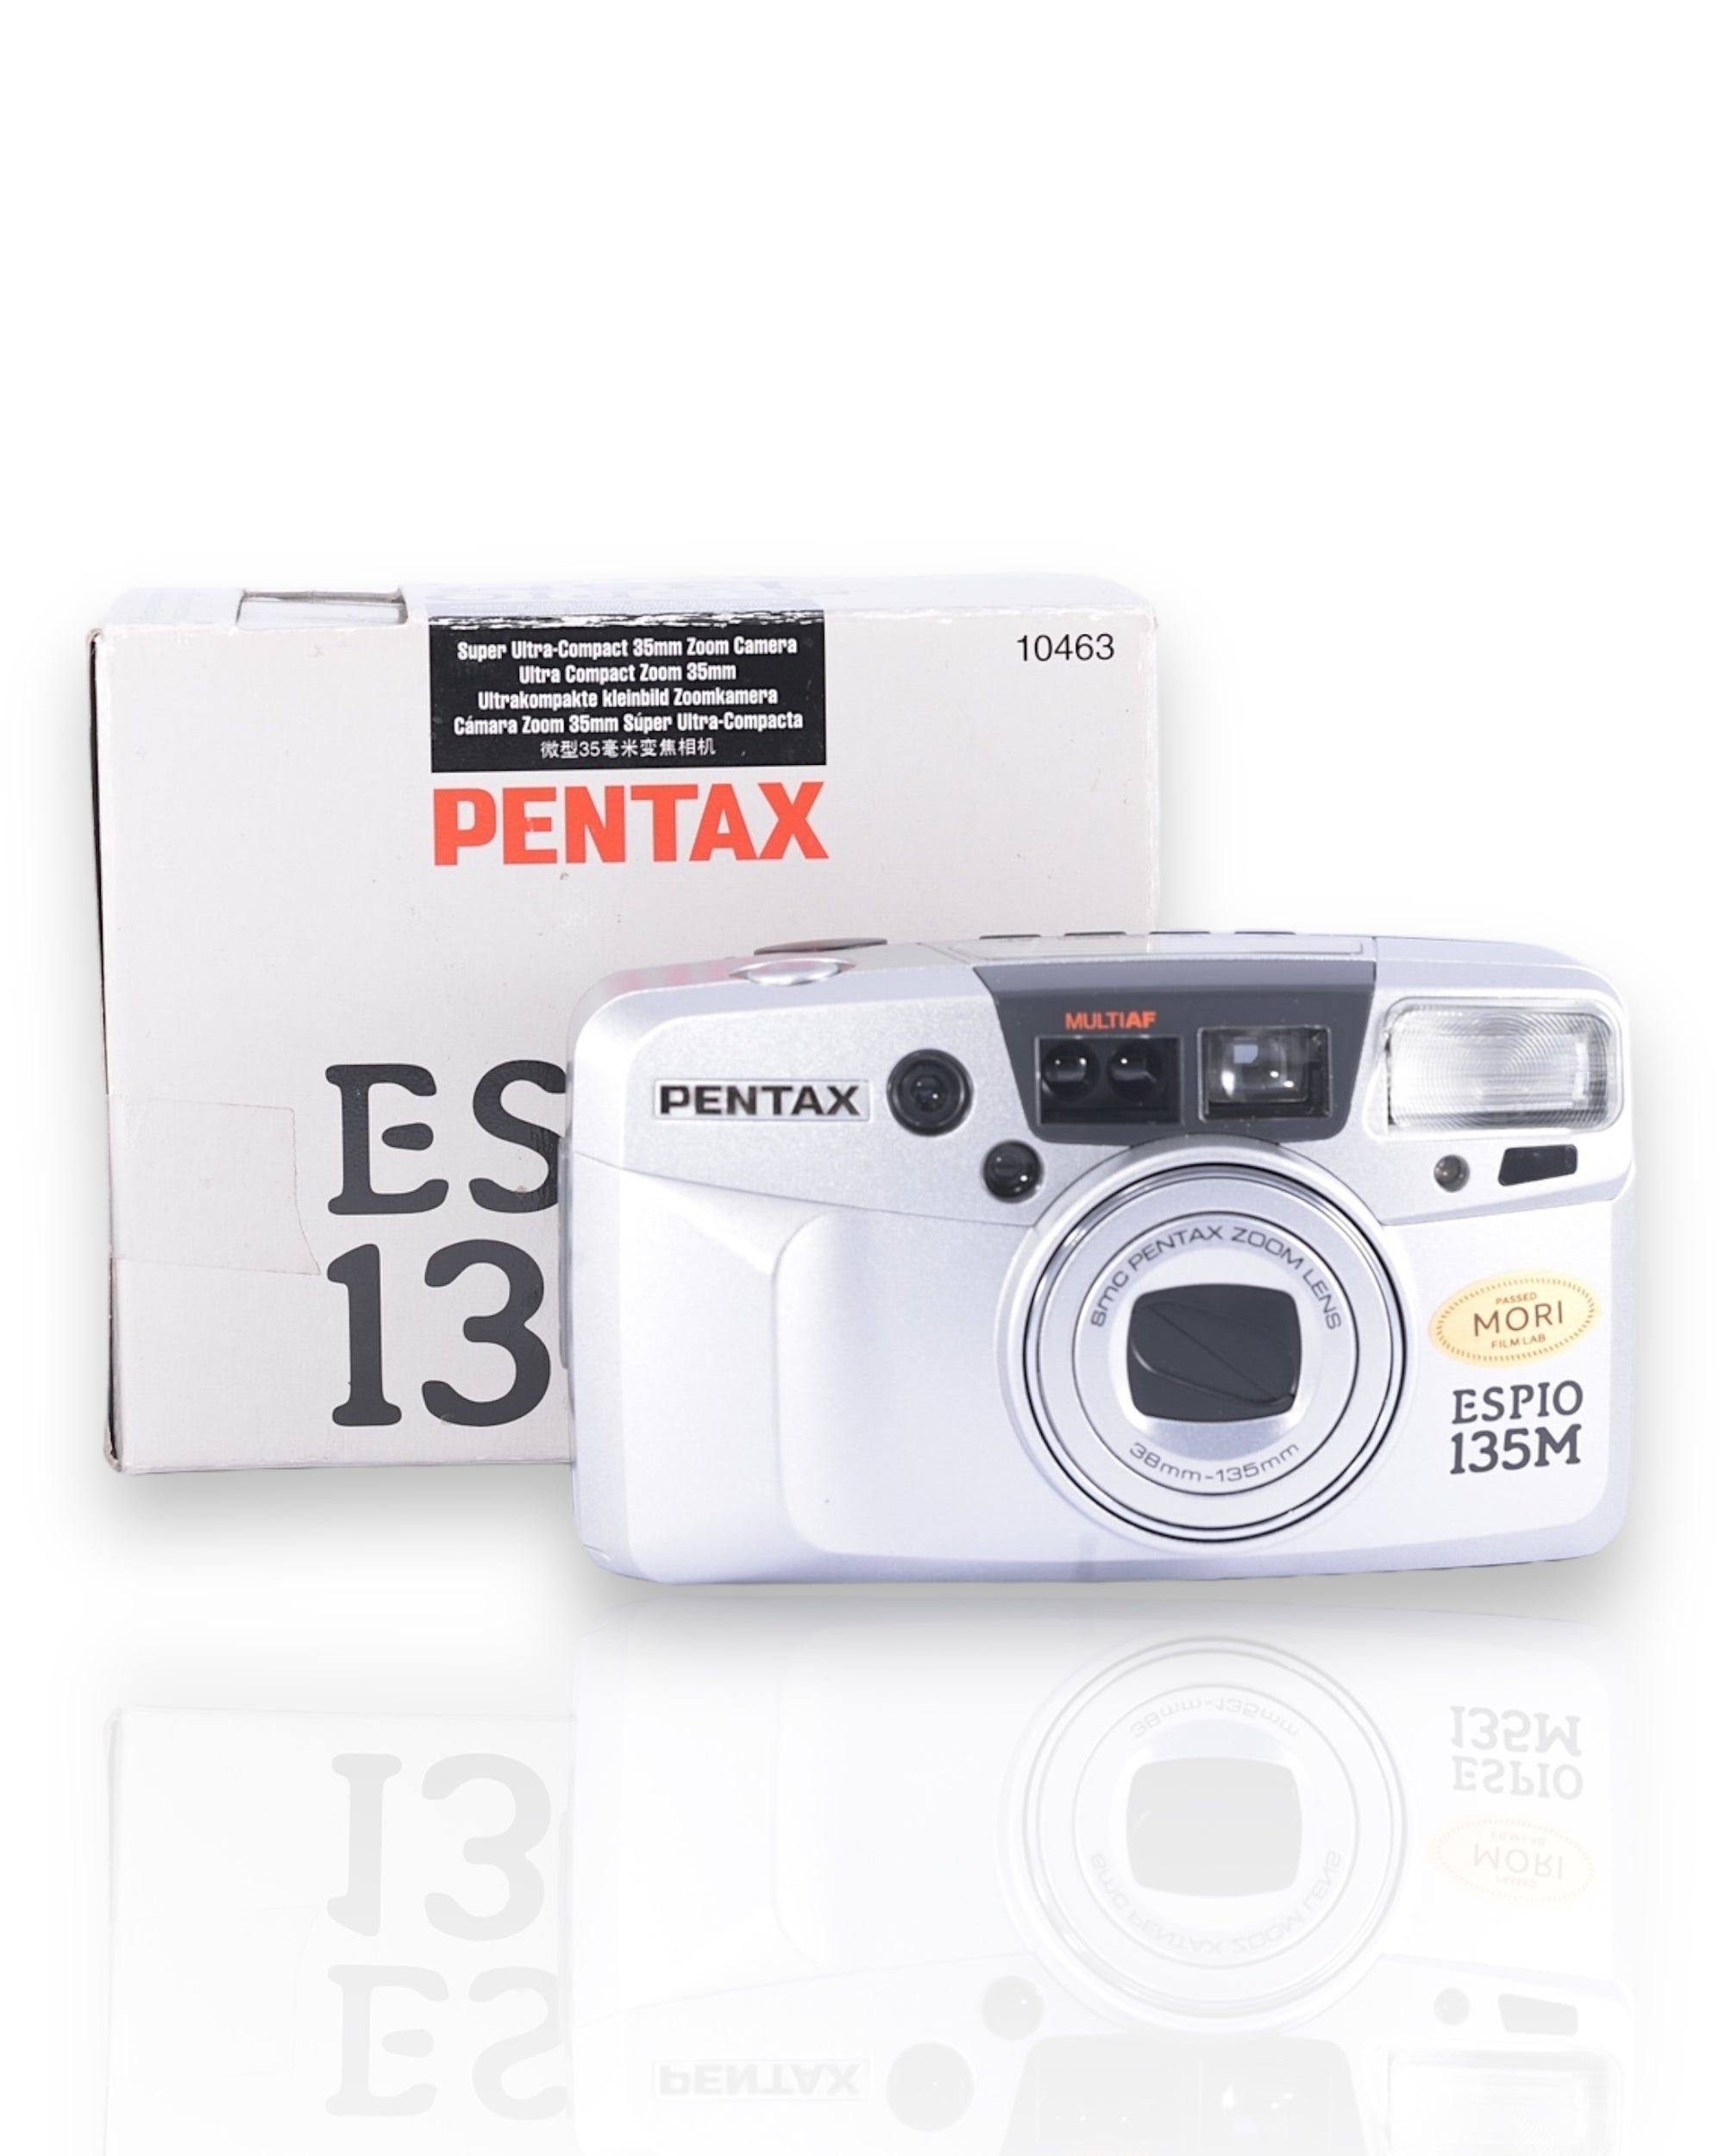 BOXED Pentax Espio 135M 35mm Point & Shoot film camera with 38-135mm zoom lens